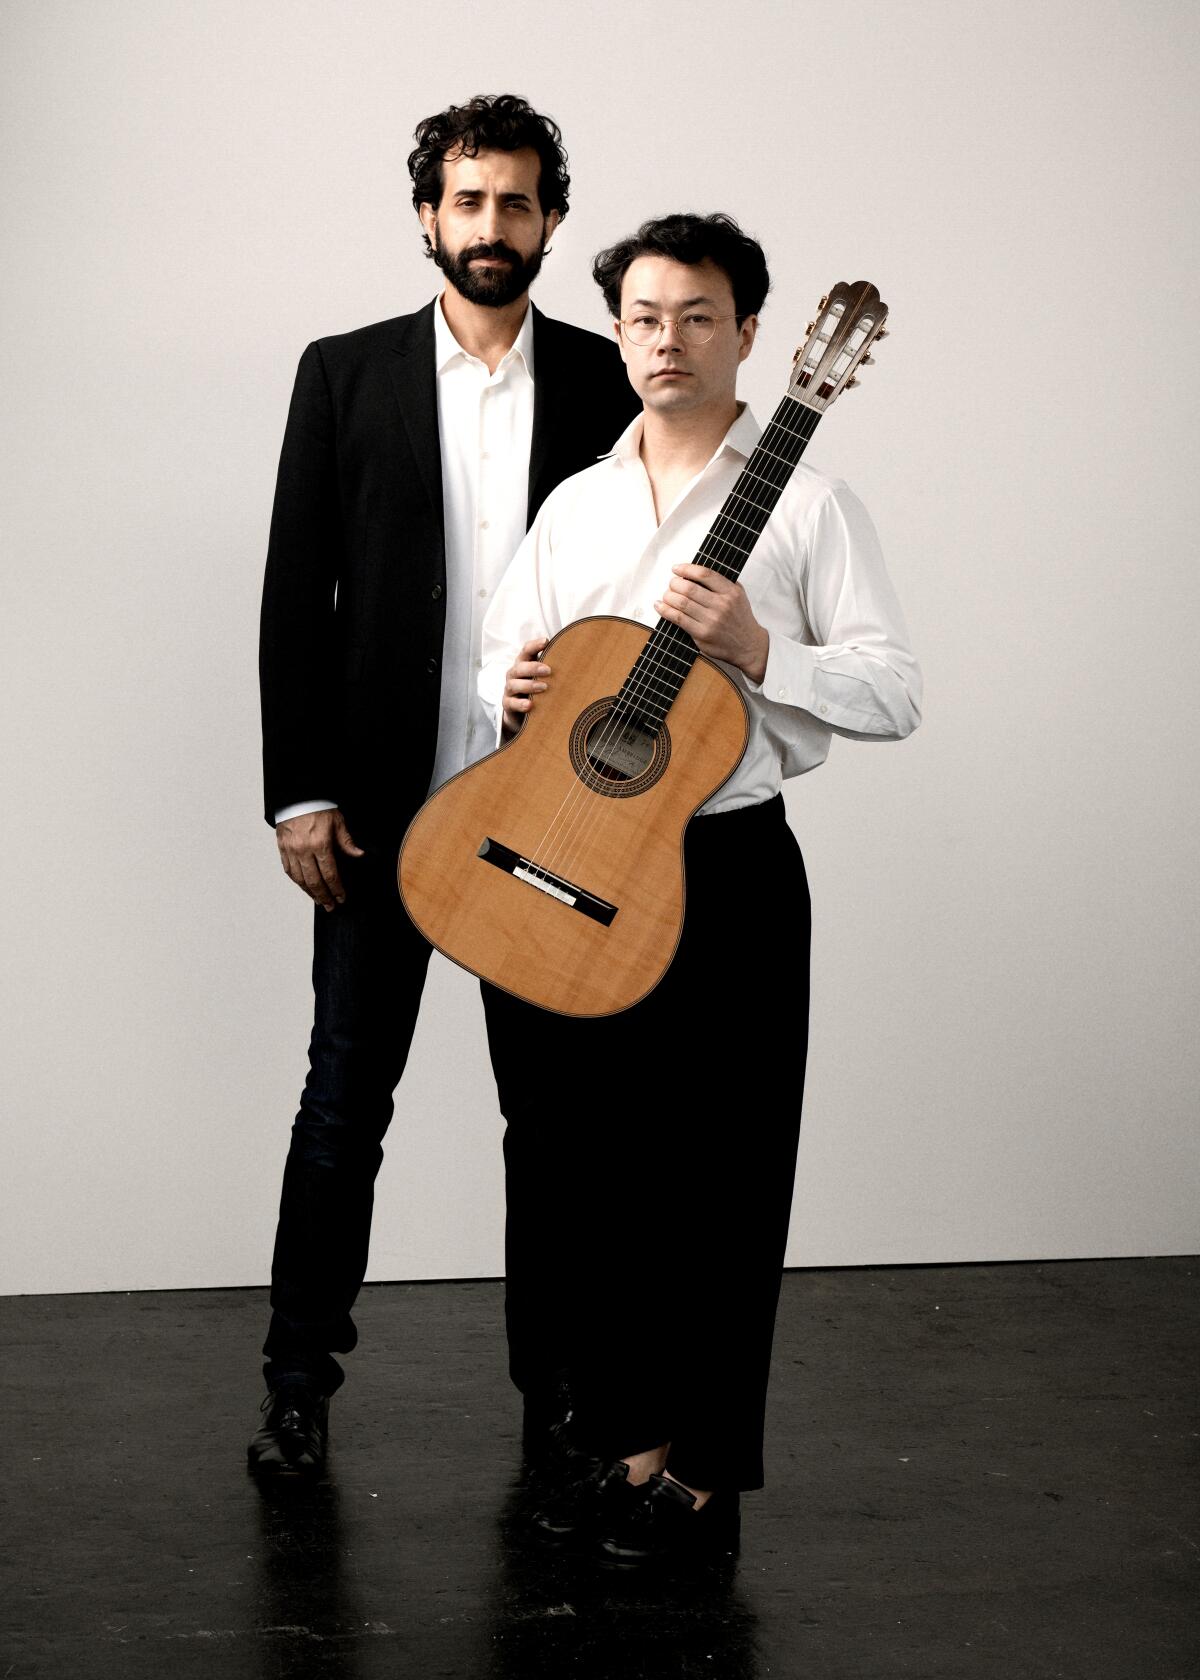 A man with a guitar standing in front of another man.